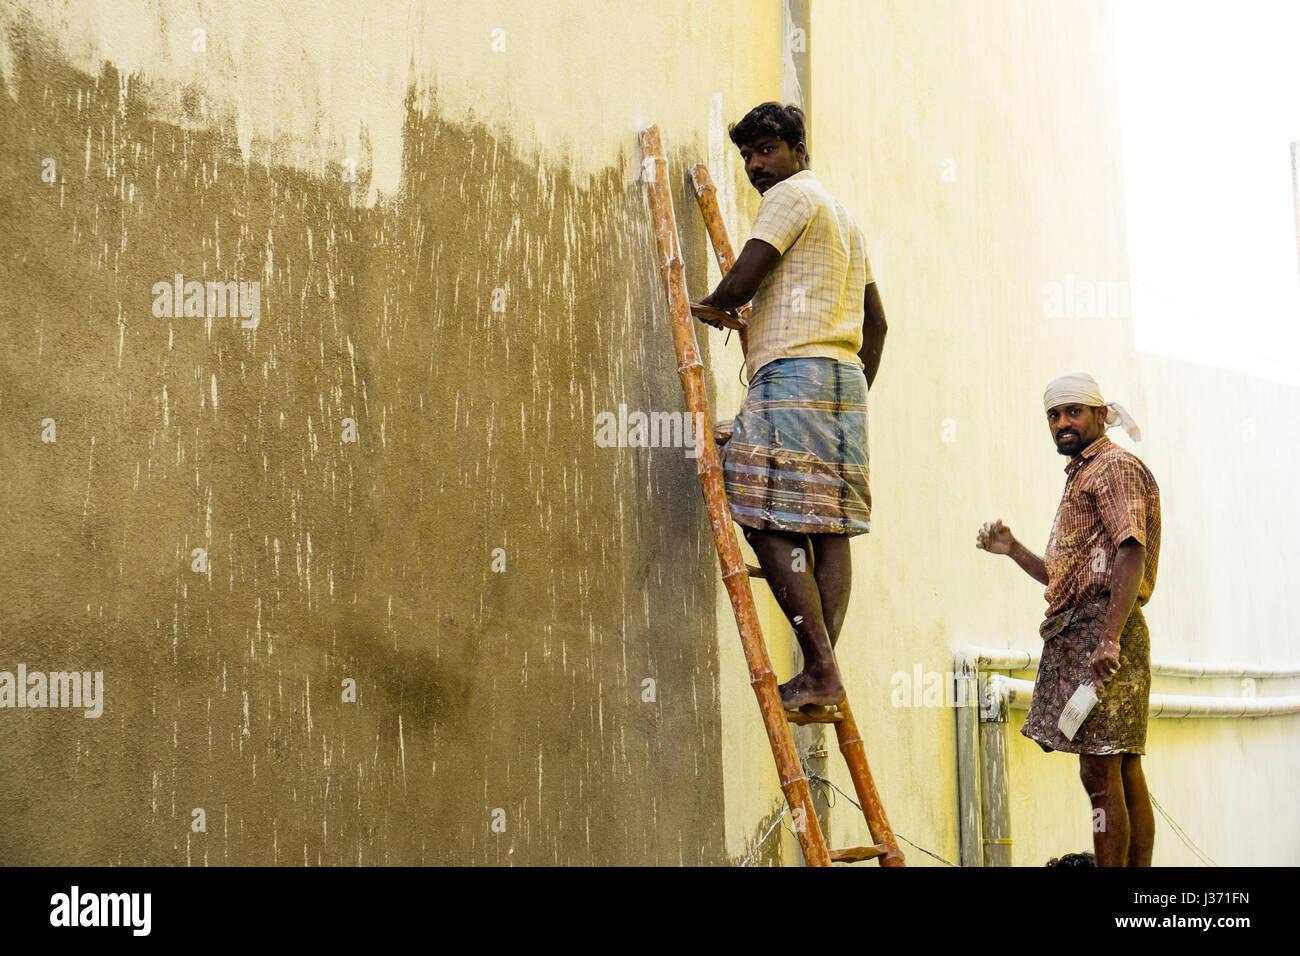 Dangerous construction sites, Construction workers, India Stock Photo